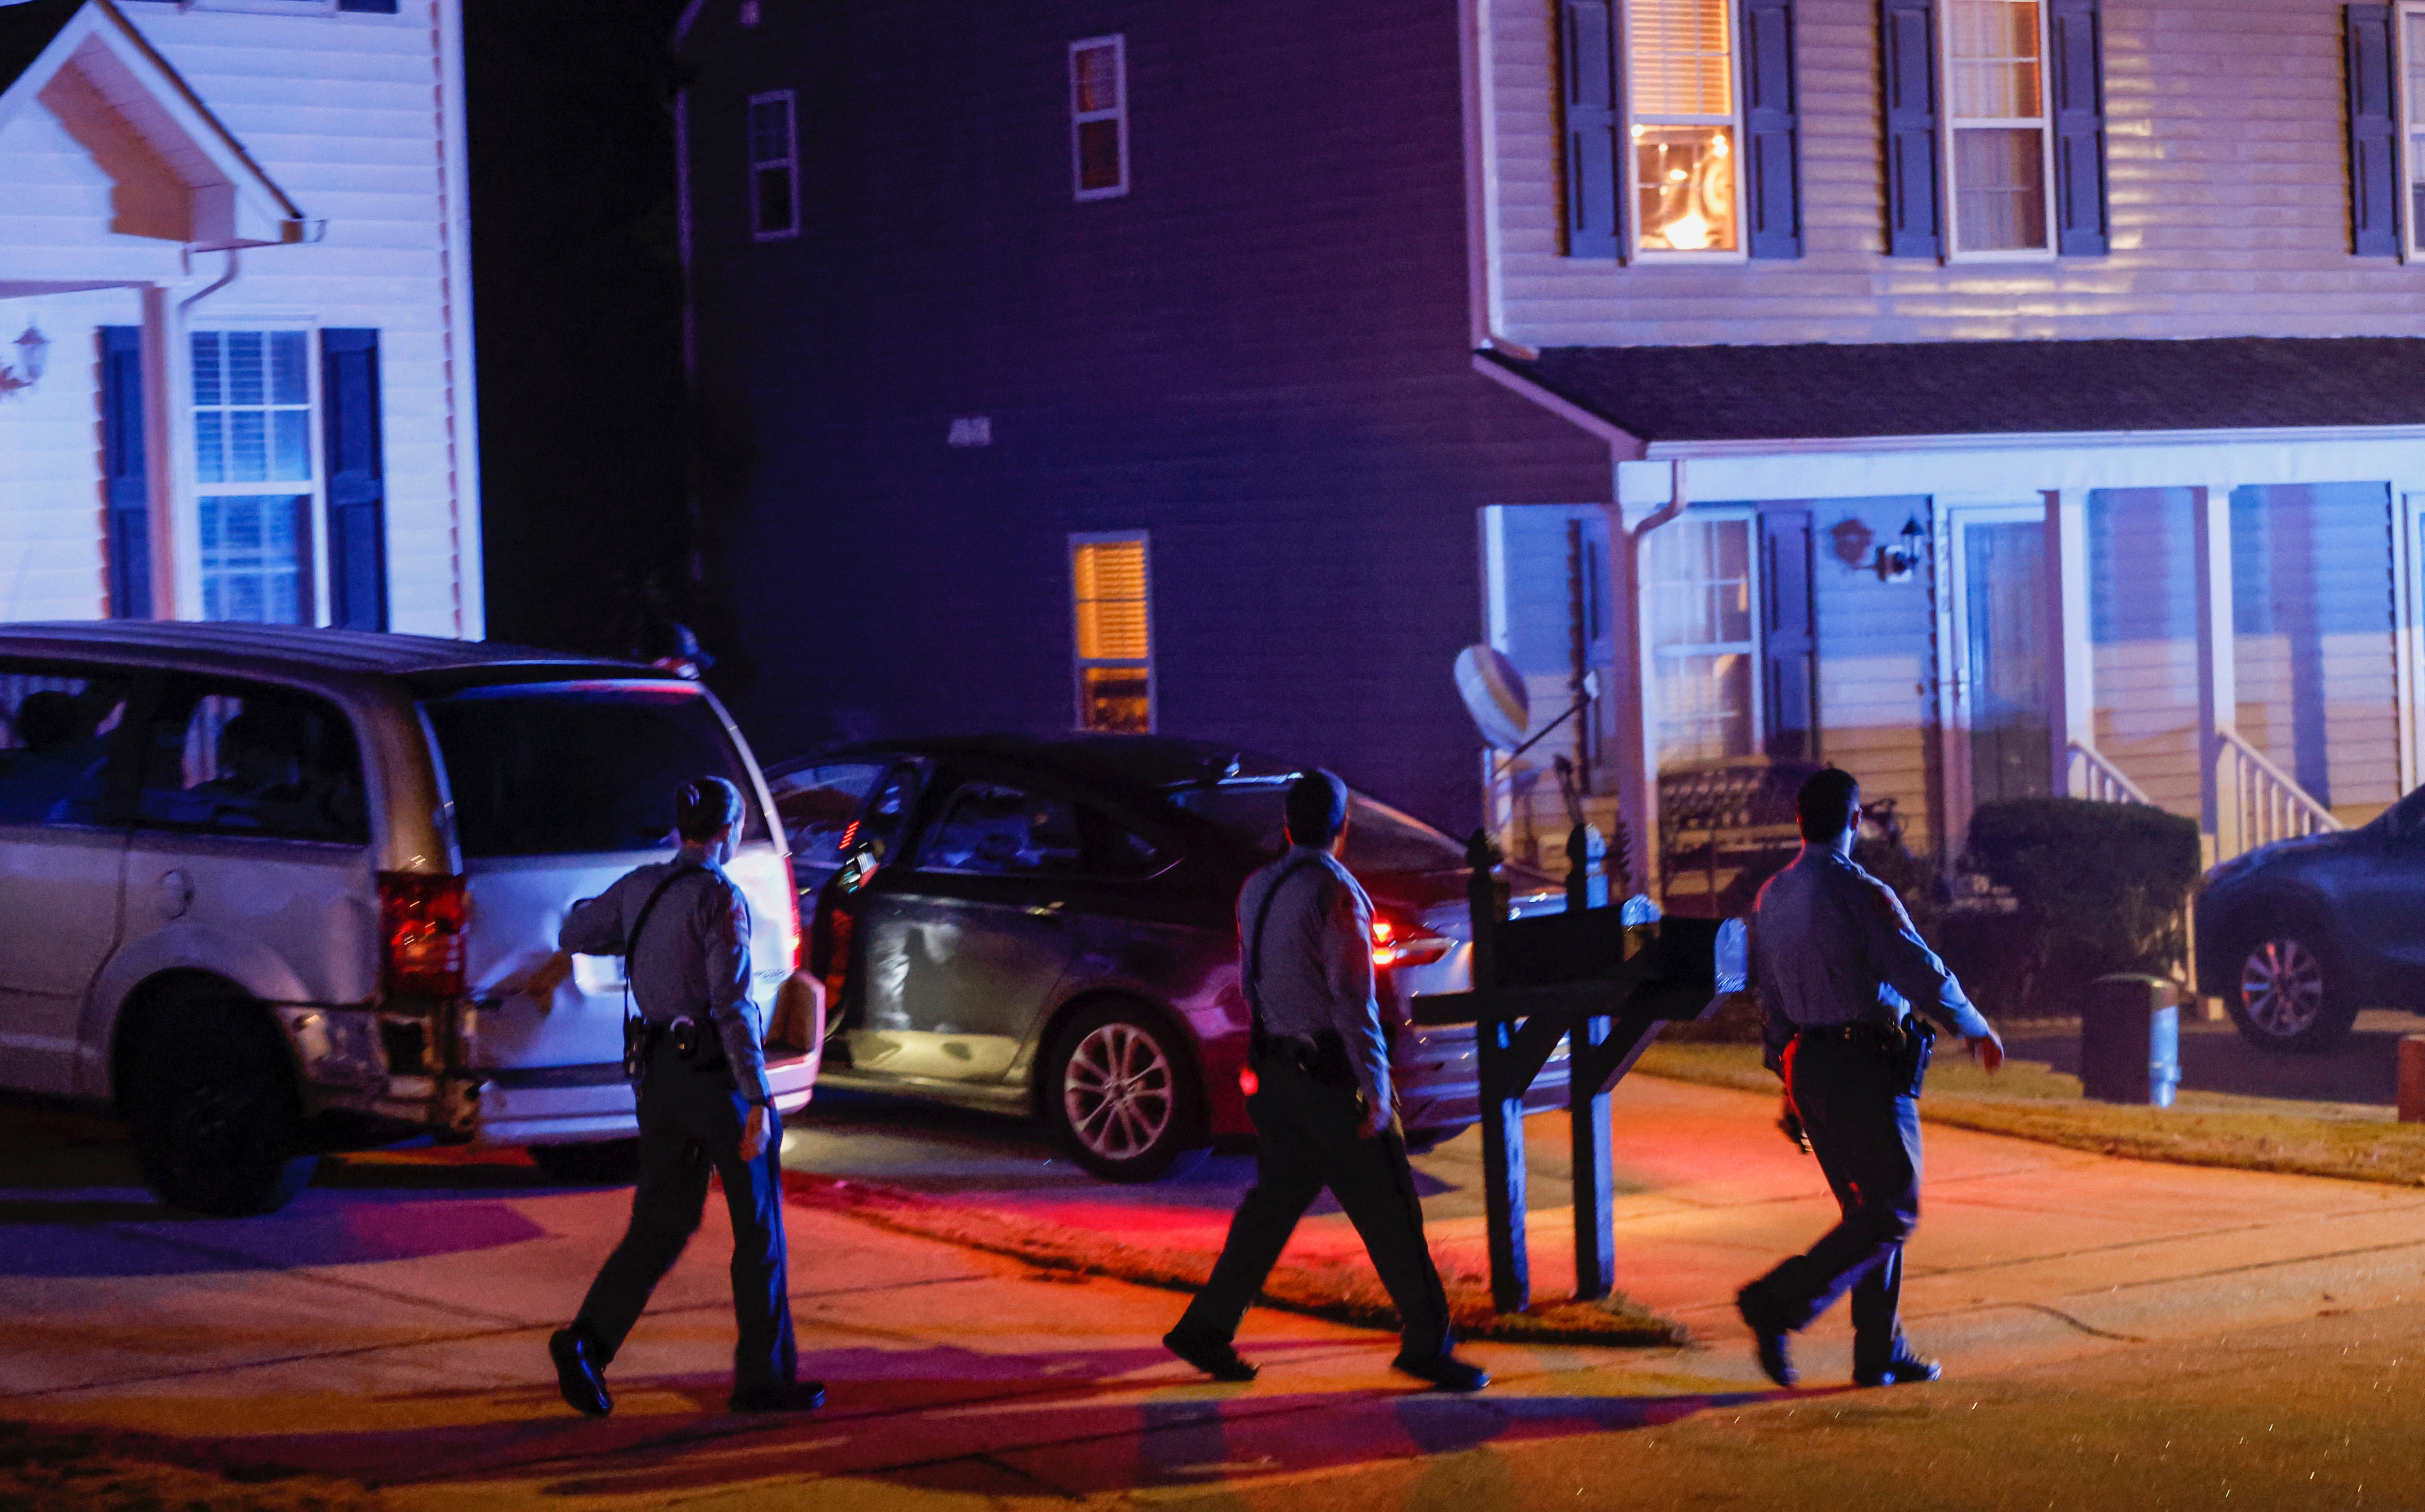 <p>Raleigh Police officers walk door-to-door checking on residents in the Hedingham neighborhood and Neuse River Trail area in Raleigh, N.C., after five people were shot and killed Thursday, Oct. 13, 2022</p>